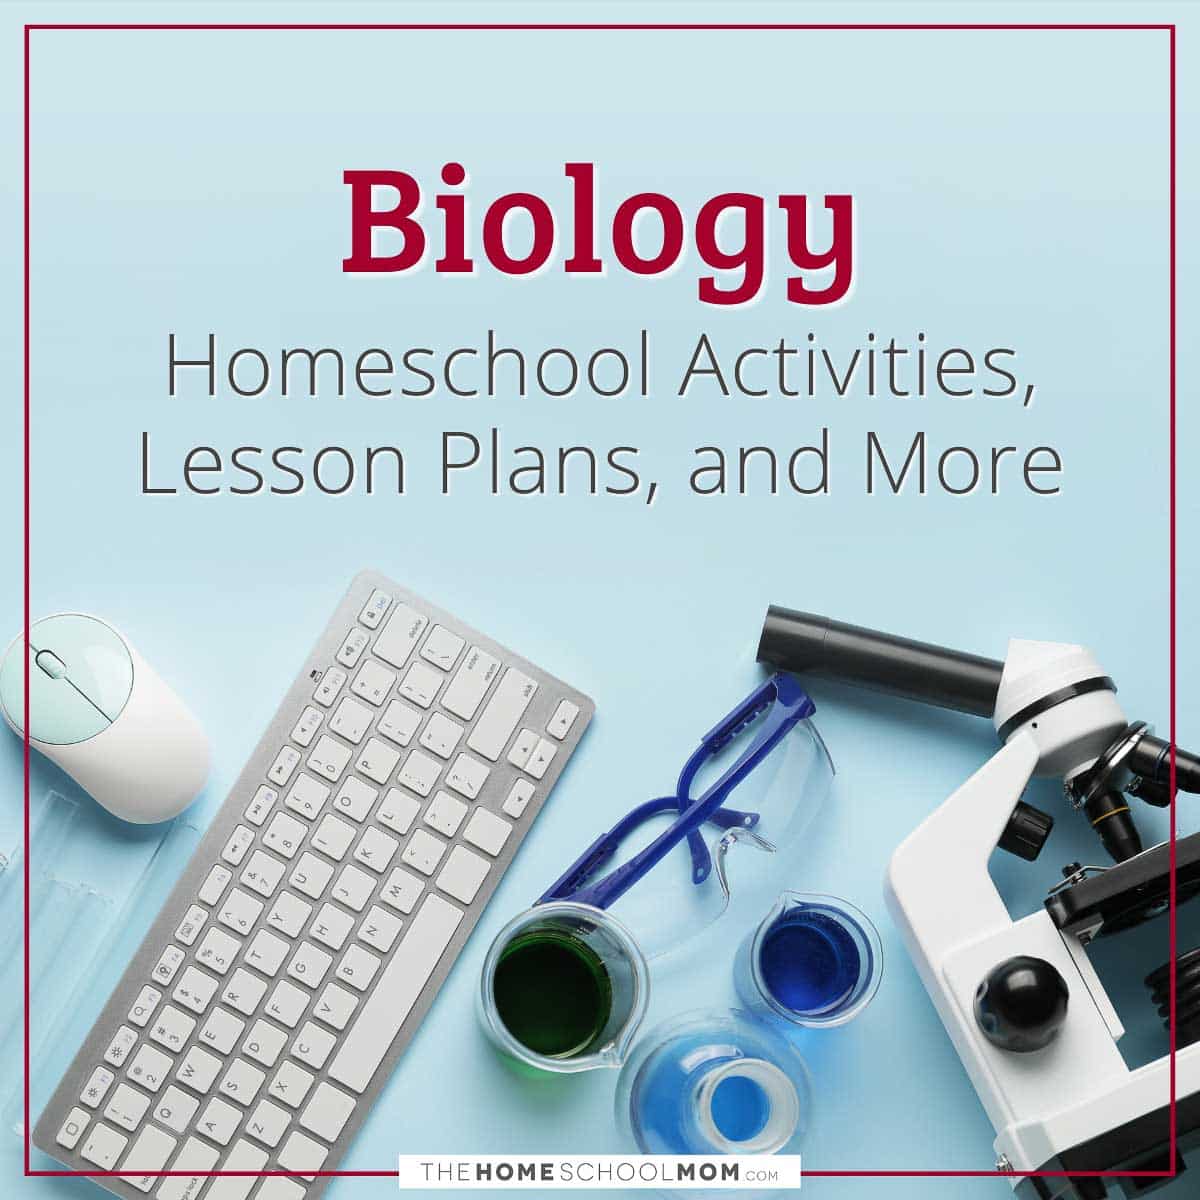 Biology Homeschool Activities, Lesson Plans, and More.